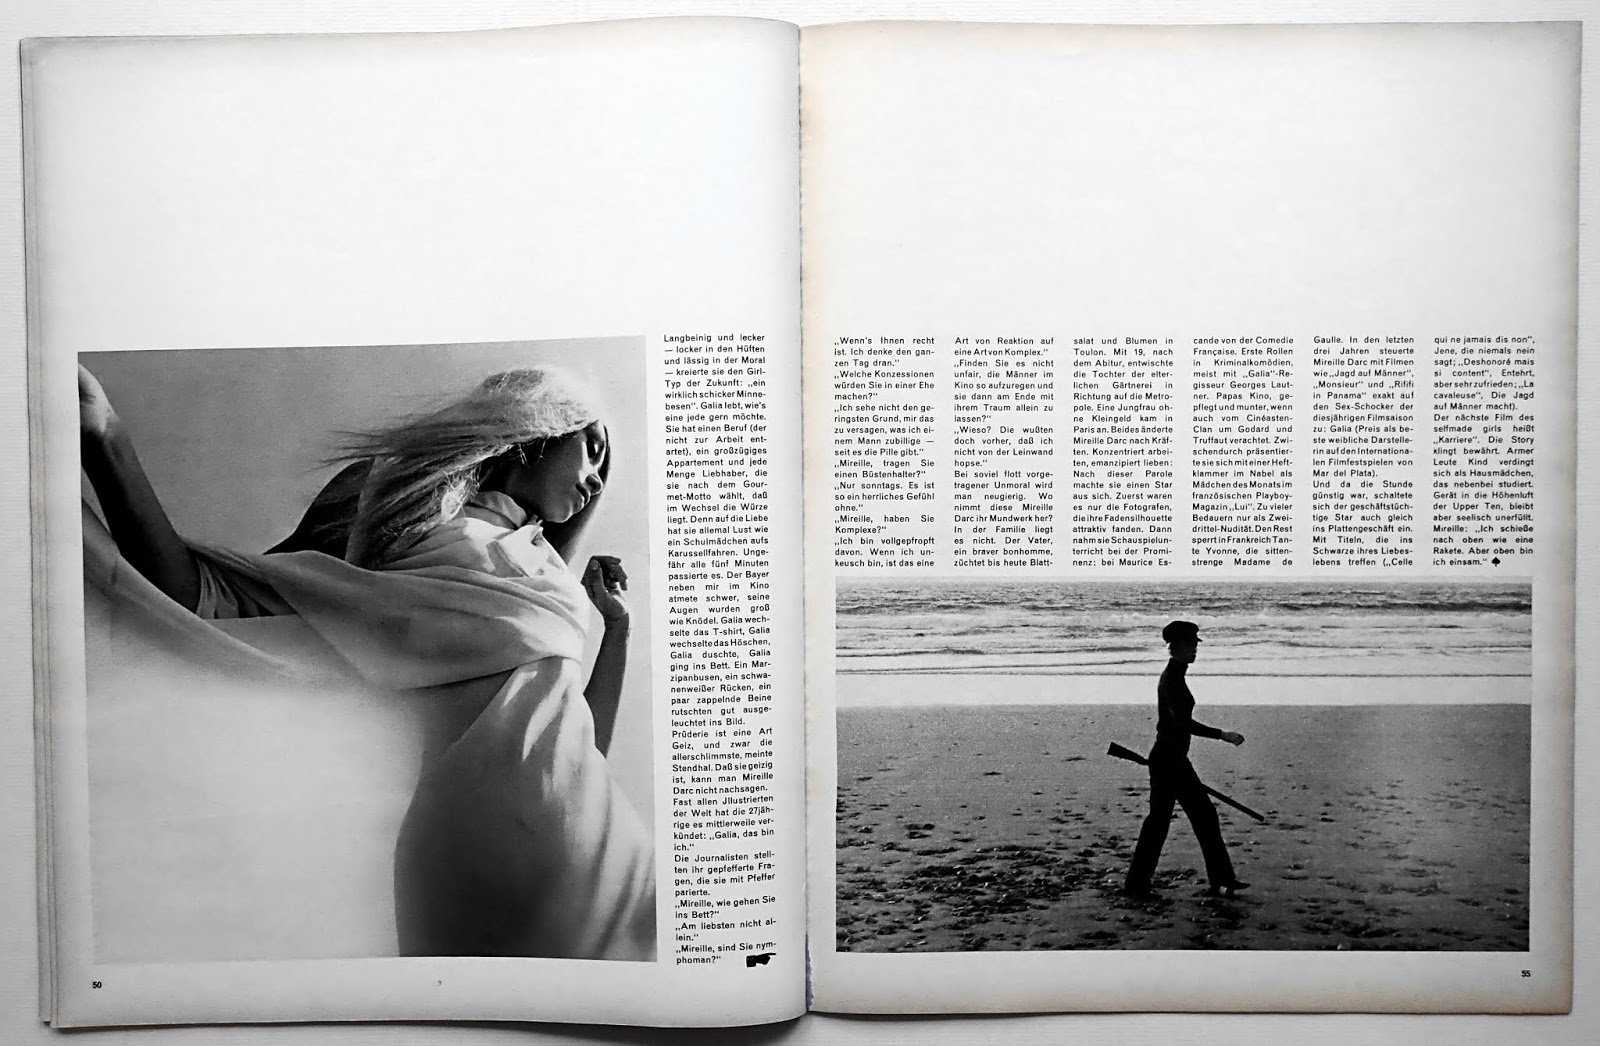 Past Print: twen / issue 8 / 1966 / selected pages 